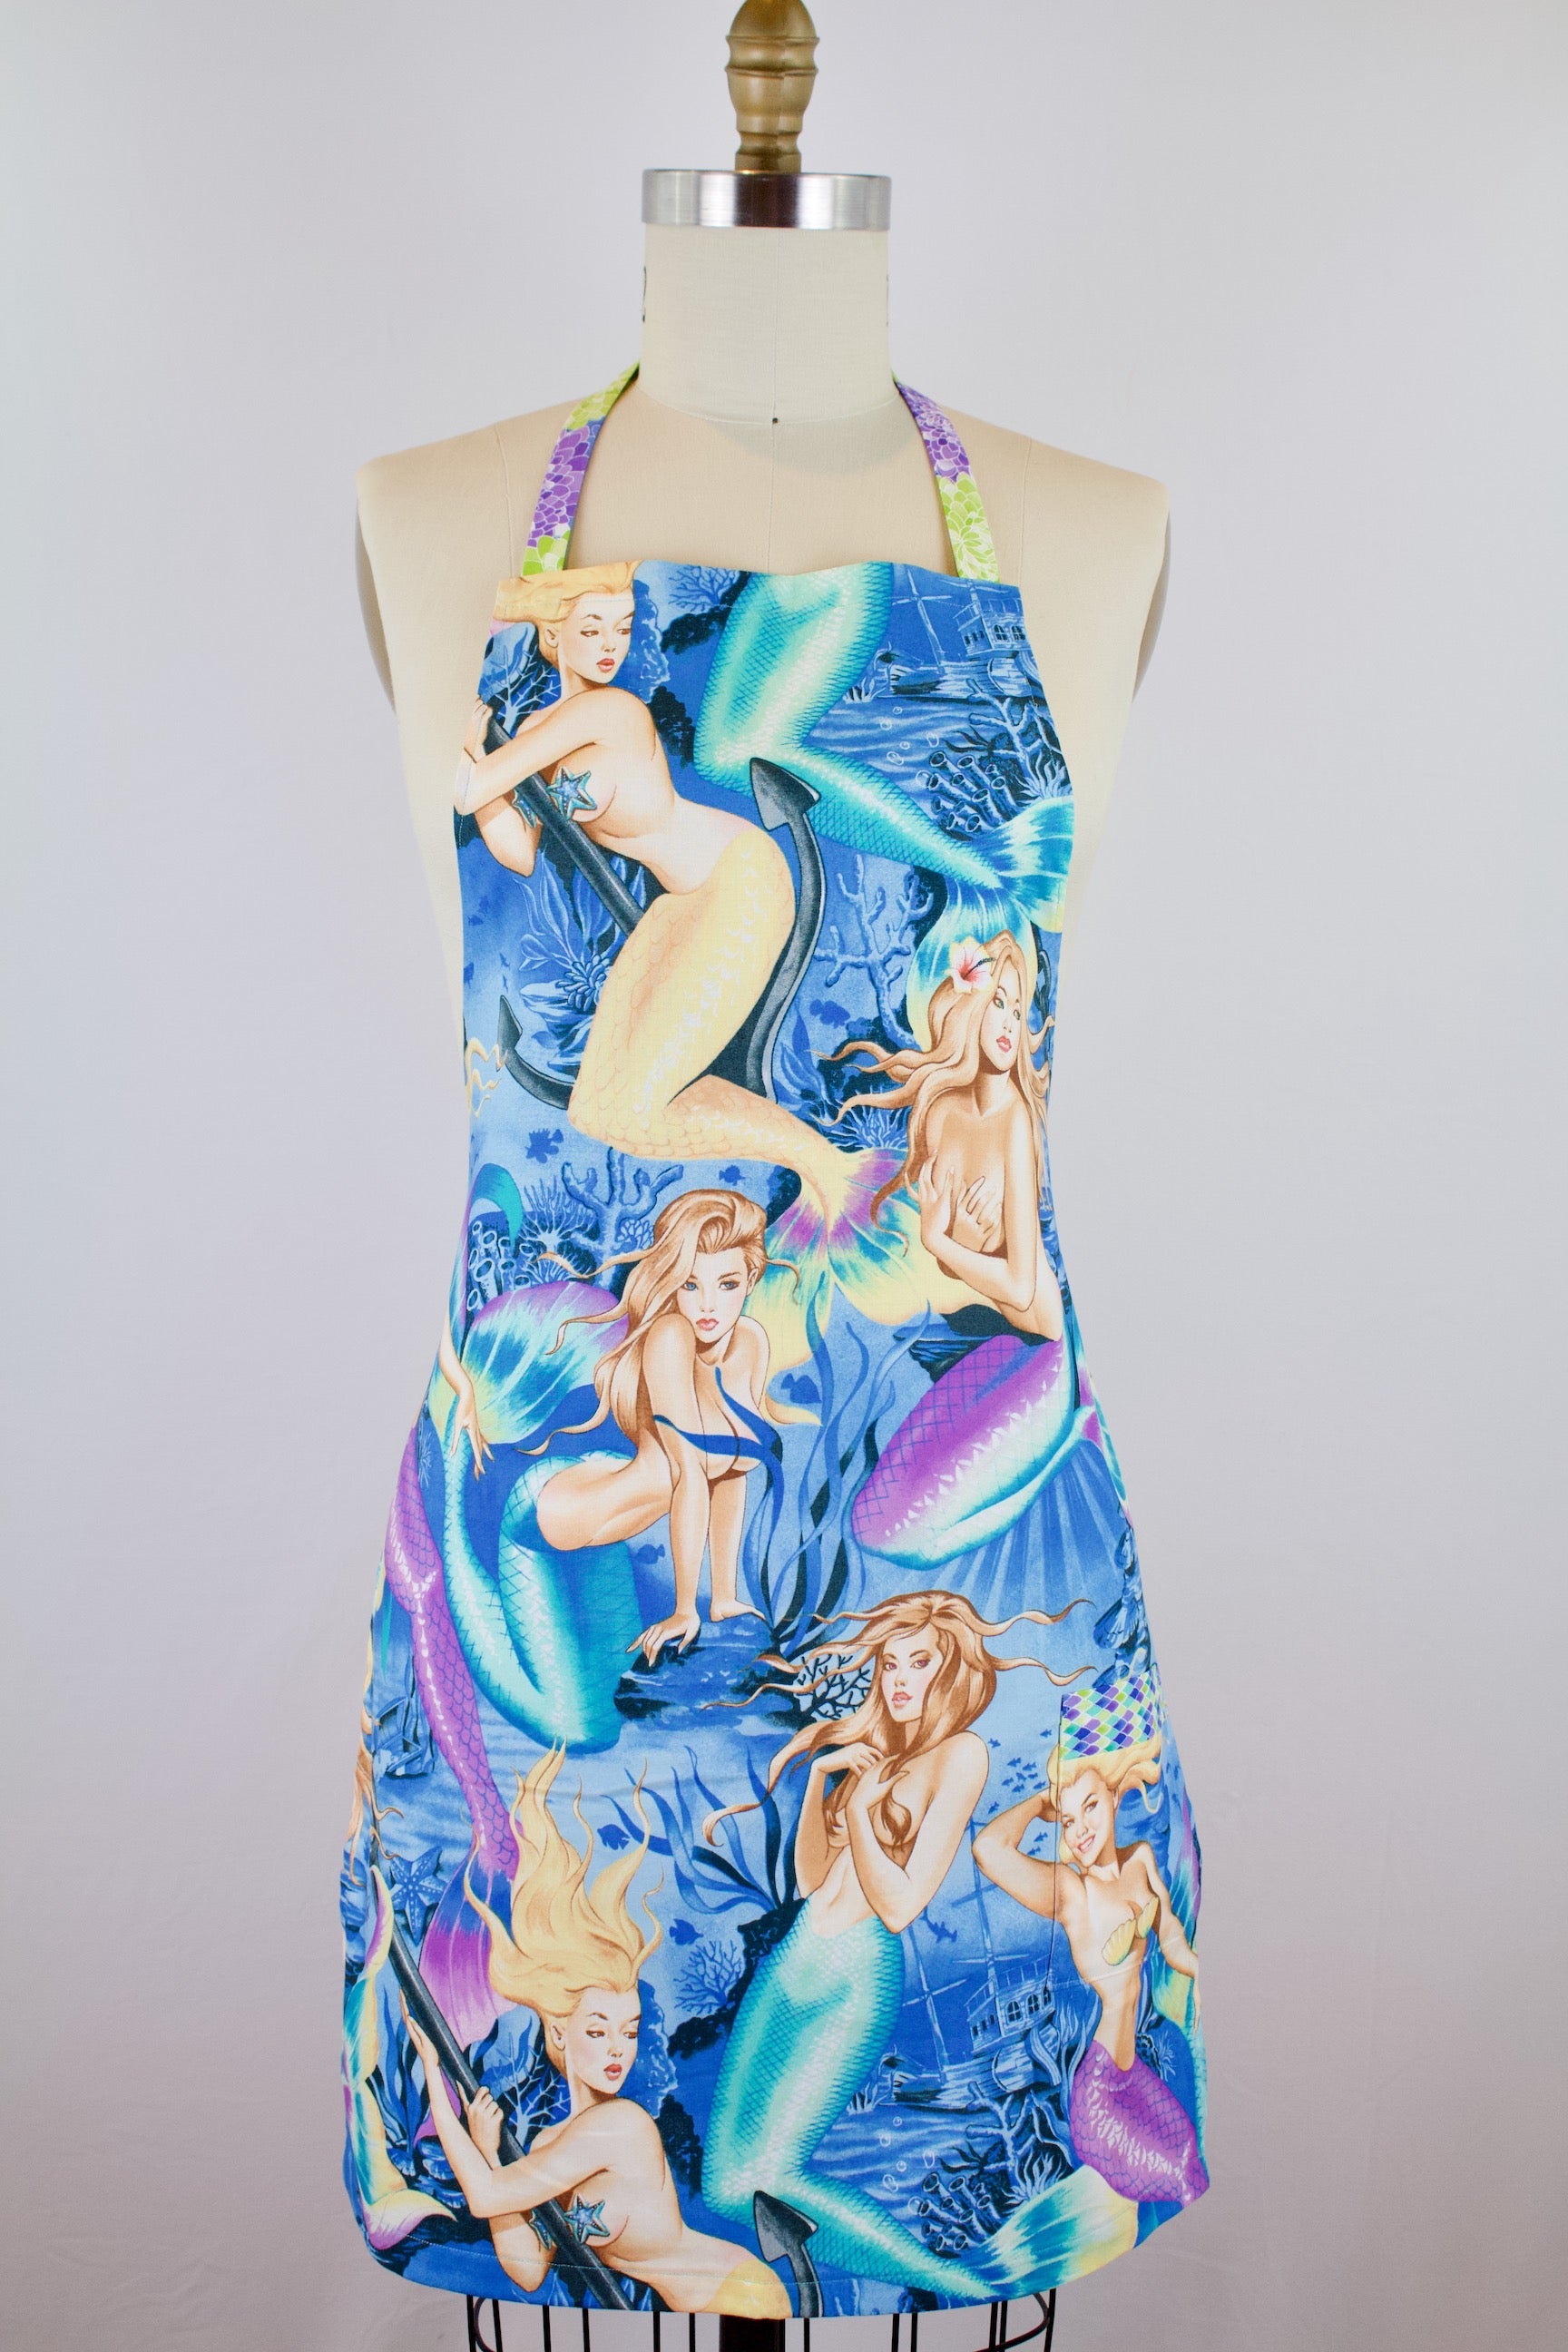 Sea Sirens Mermaid Apron-The Blue Peony-Age Group_Adult,Animal_Mermaid,Apron Style_Chef,Category_Apron,Color_Aqua,Color_Purple,Color_Teal,Department_Kitchen,Material_Cotton,Theme_Hunks,Theme_Summer,Theme_Tropical,Theme_Water Life